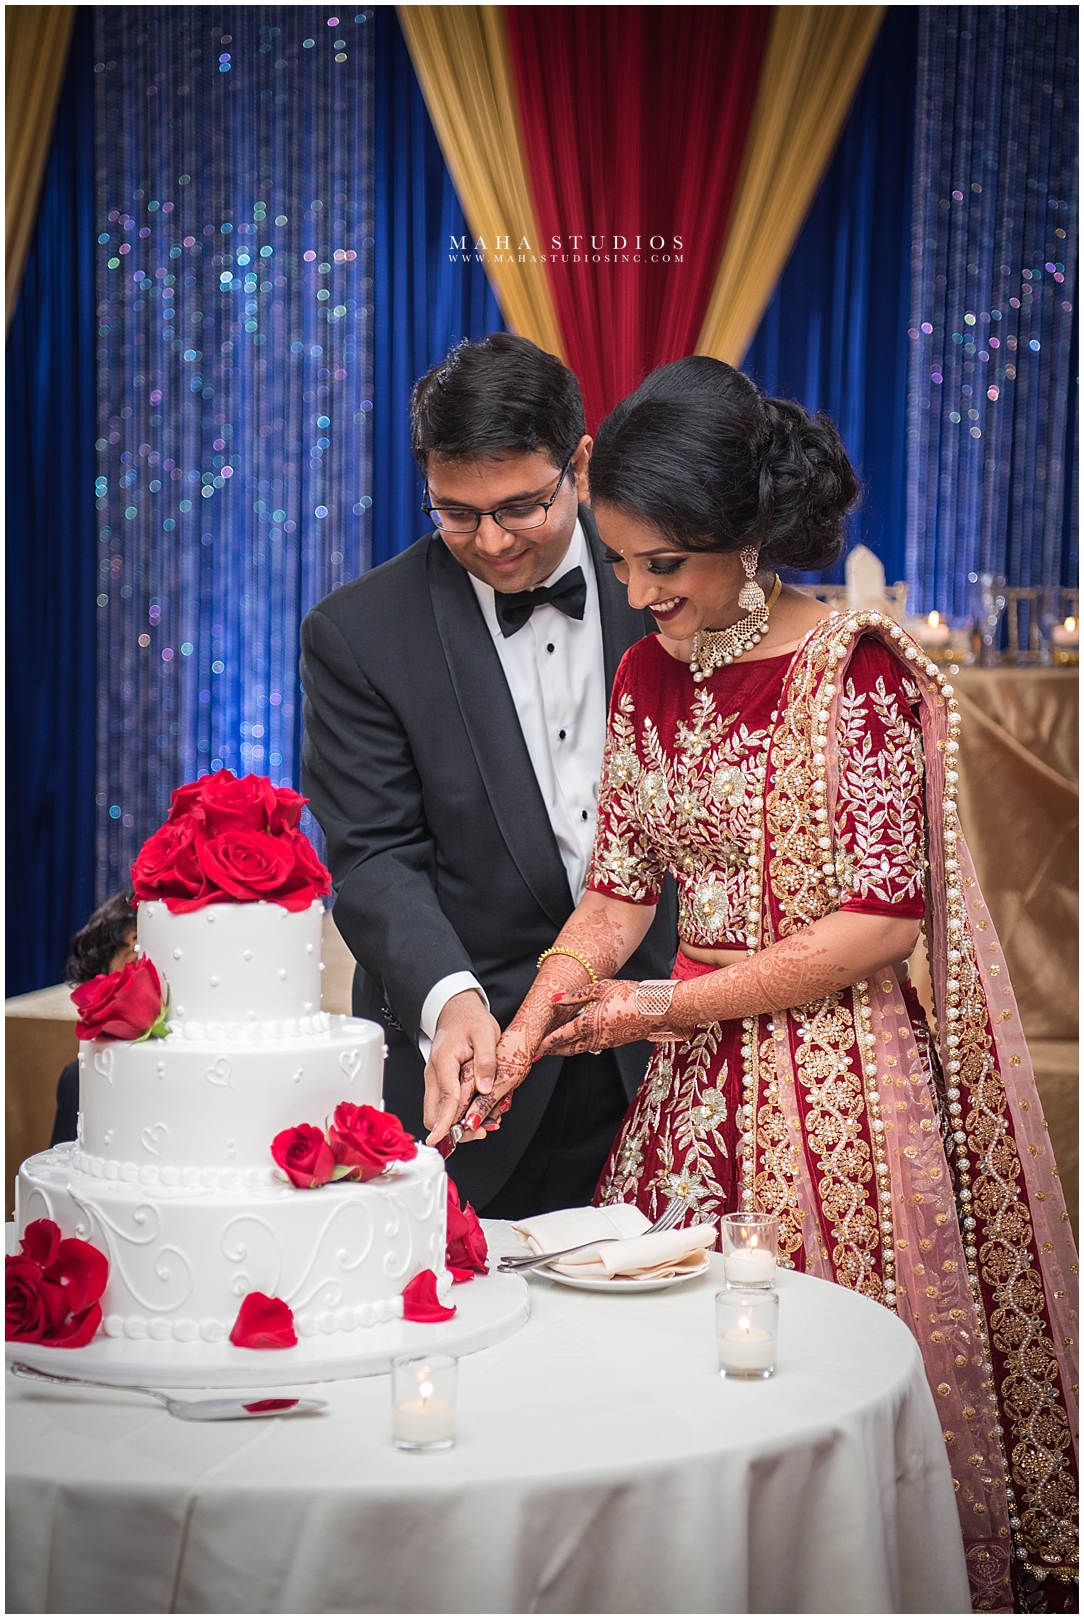 Telegu Bride and Groom cut simple white Chicago Wedding Cake at their reception in Marriott O'Hare